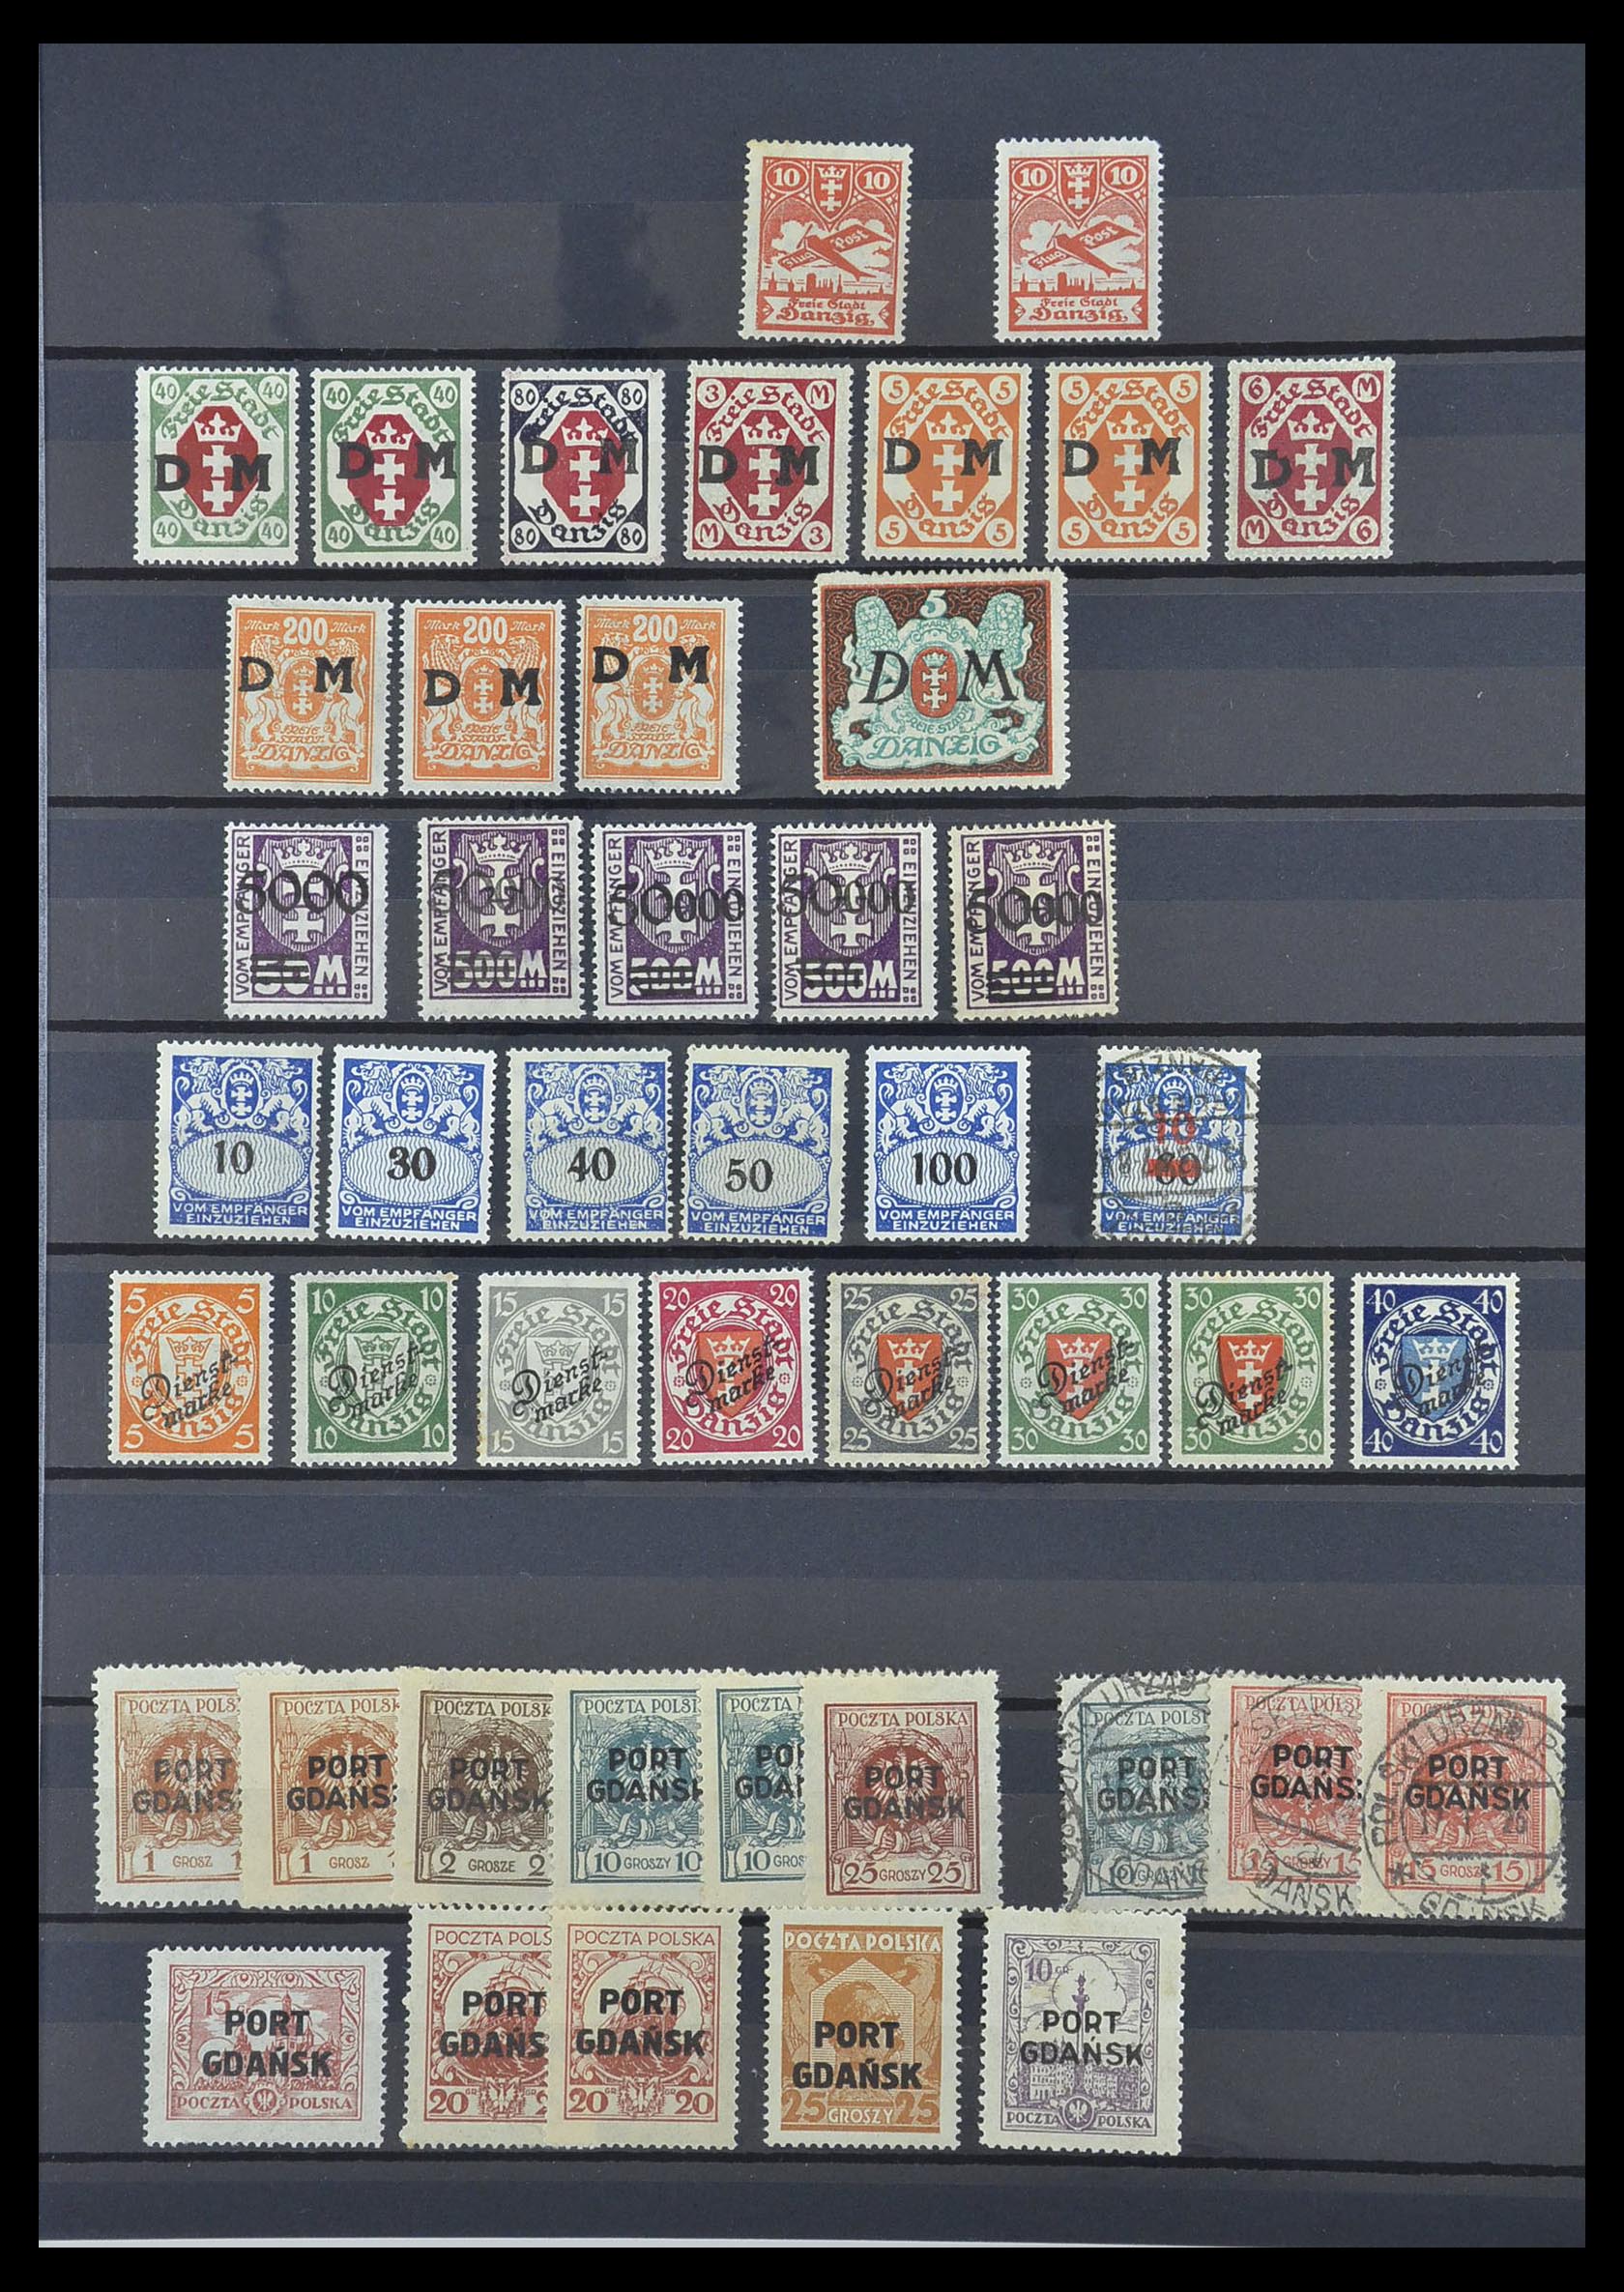 33756 088 - Stamp collection 33756 World classic 1850-1930.